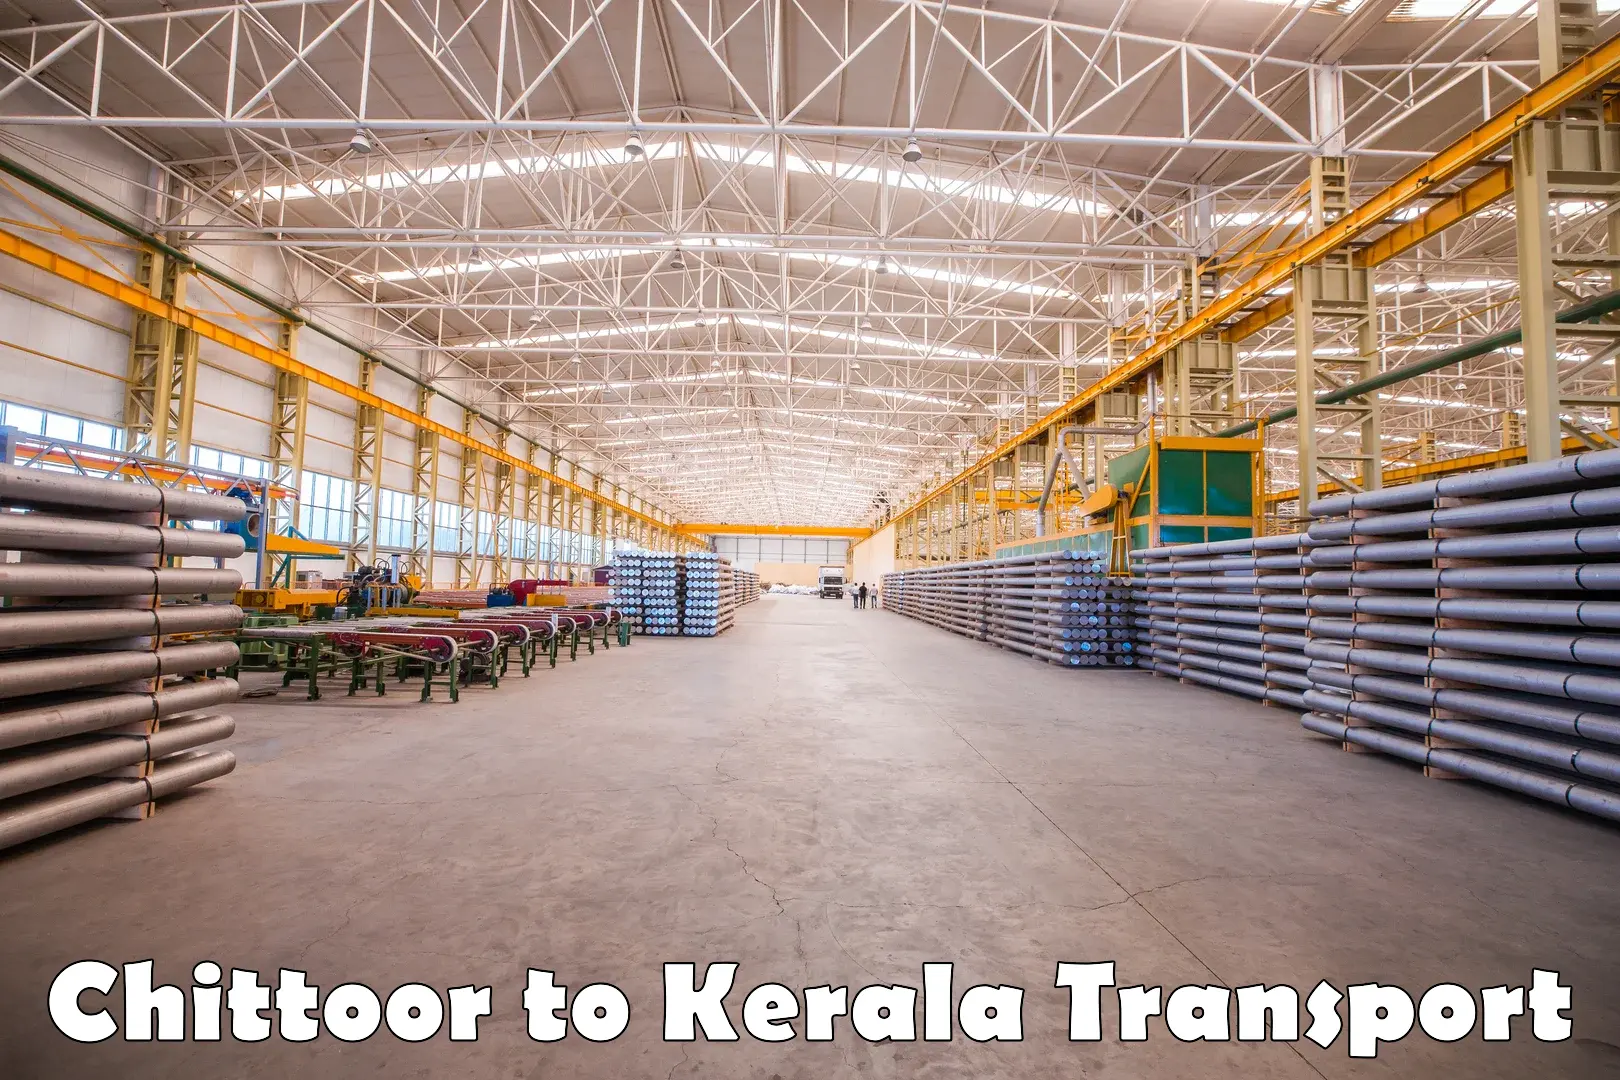 Truck transport companies in India Chittoor to Kerala